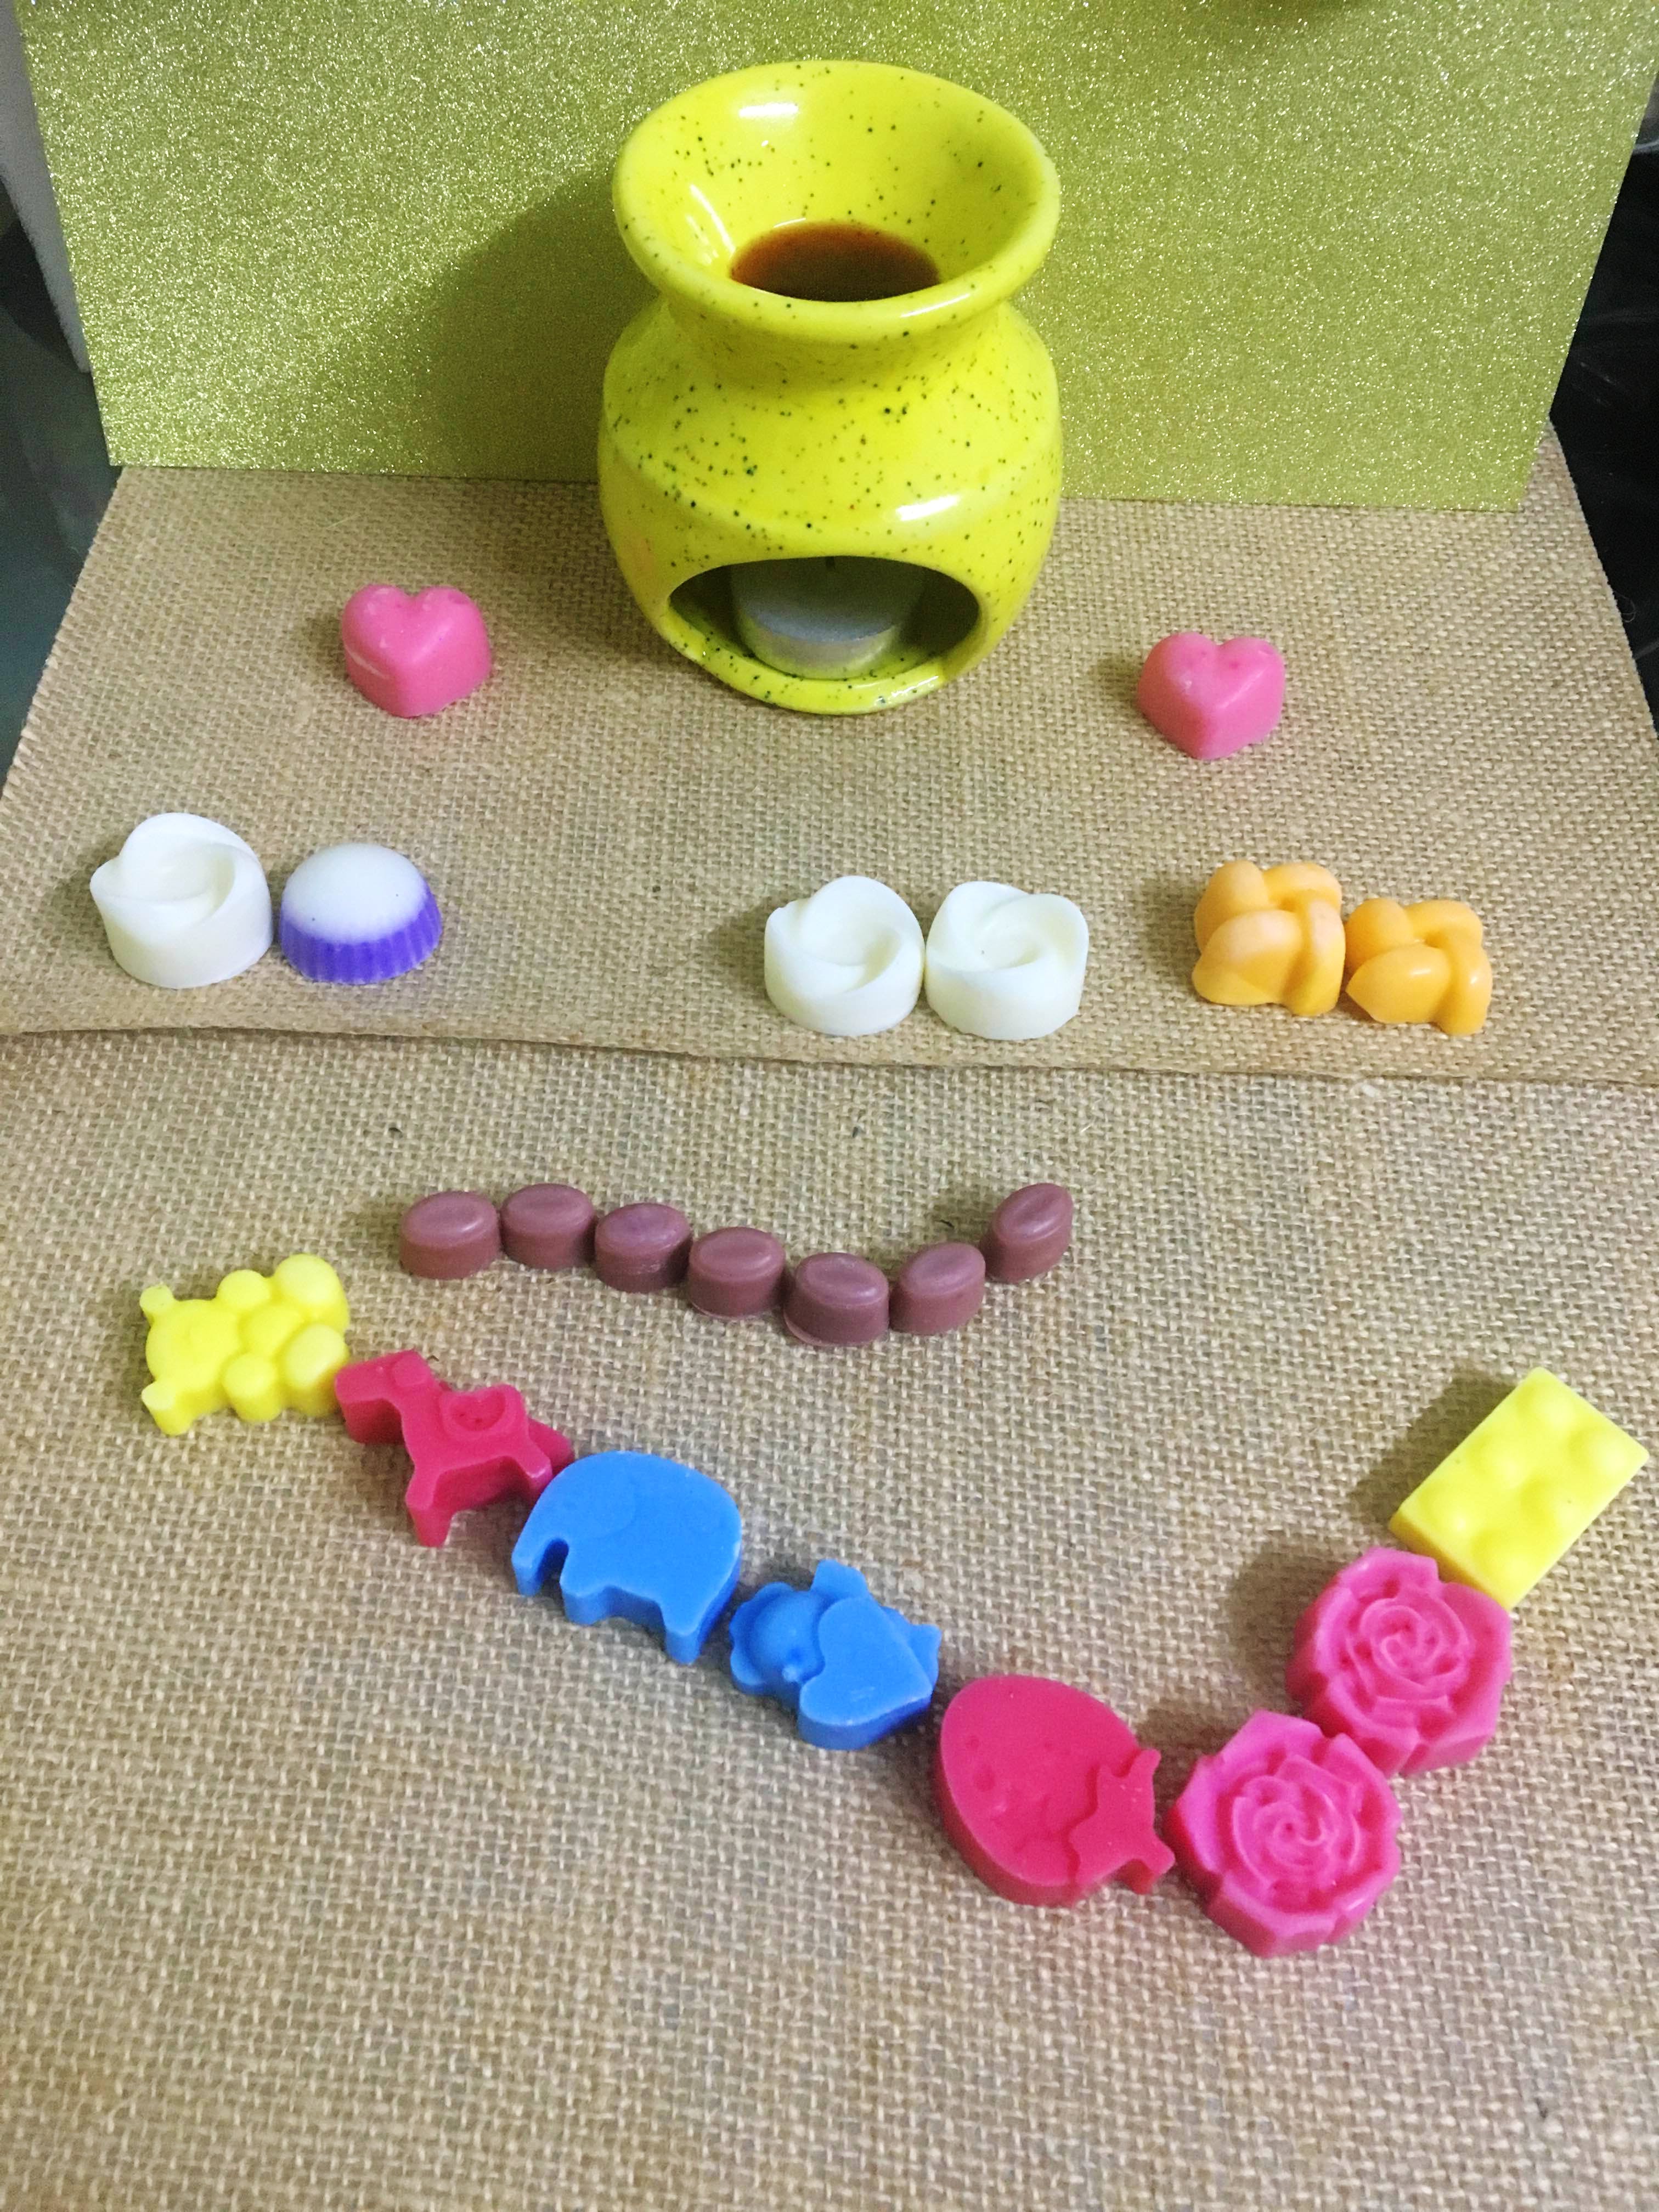 Yellow,Button,Play-doh,Fashion accessory,Heart